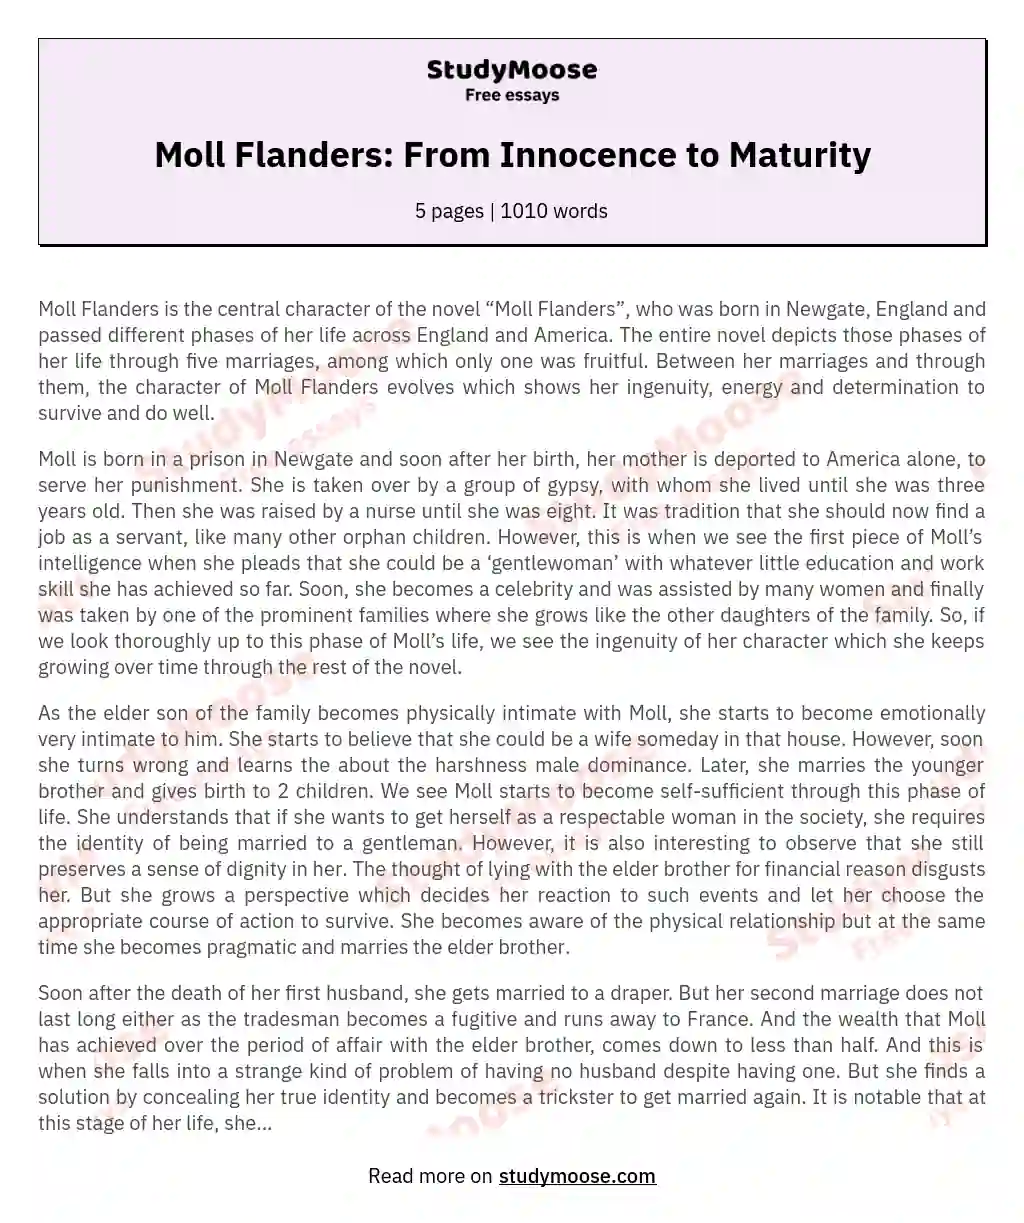 Moll Flanders: From Innocence to Maturity